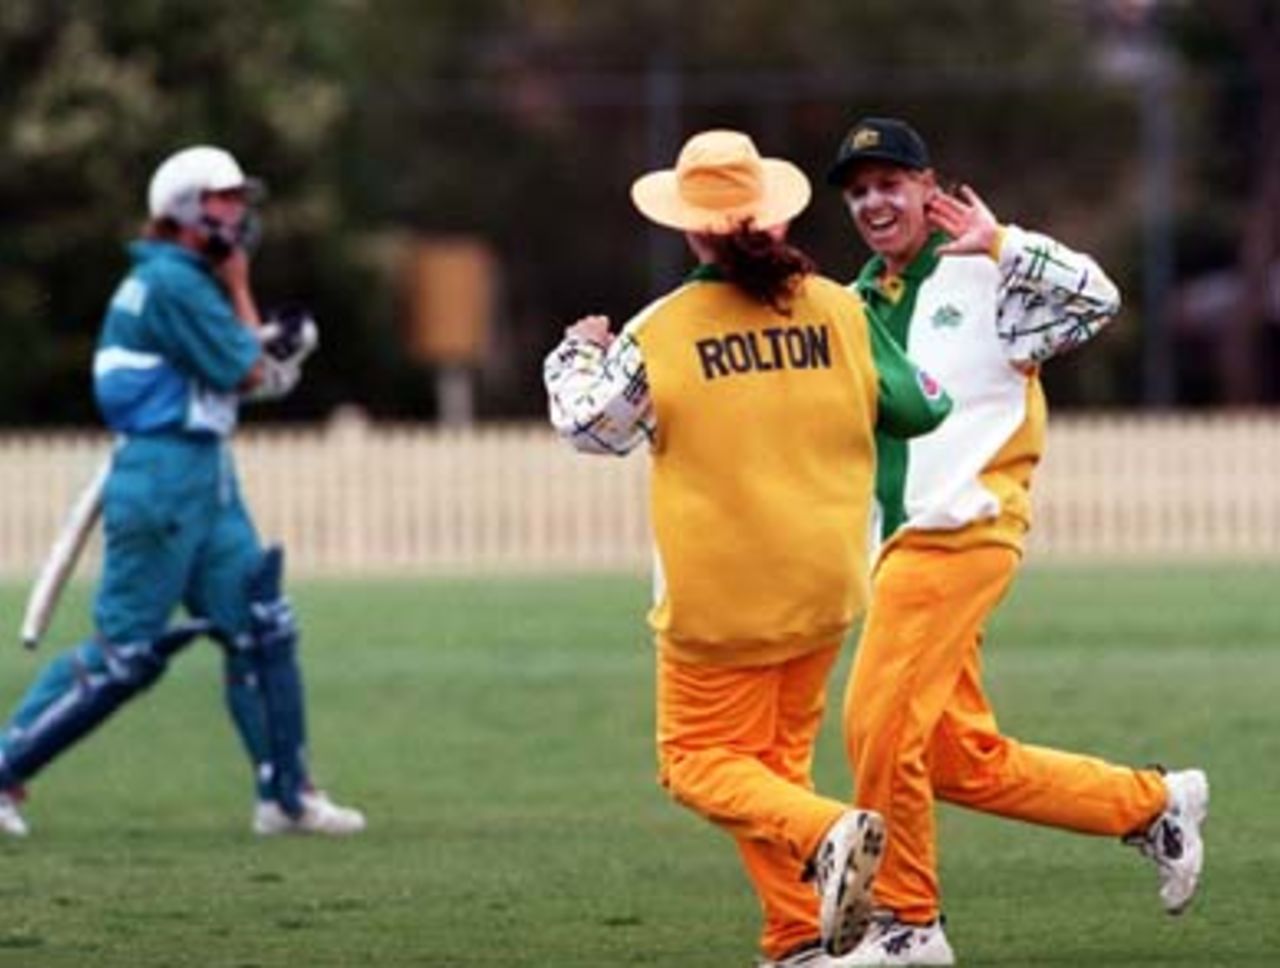 Joanne Broadbent (right) congratulates her fellow South Australian Karen Rolton on taking the first catch of the NZ innings . Aust v NZ 3rd ODI at Memorial Oval, Bankstown, Sydney Saturday November 8th 1997.